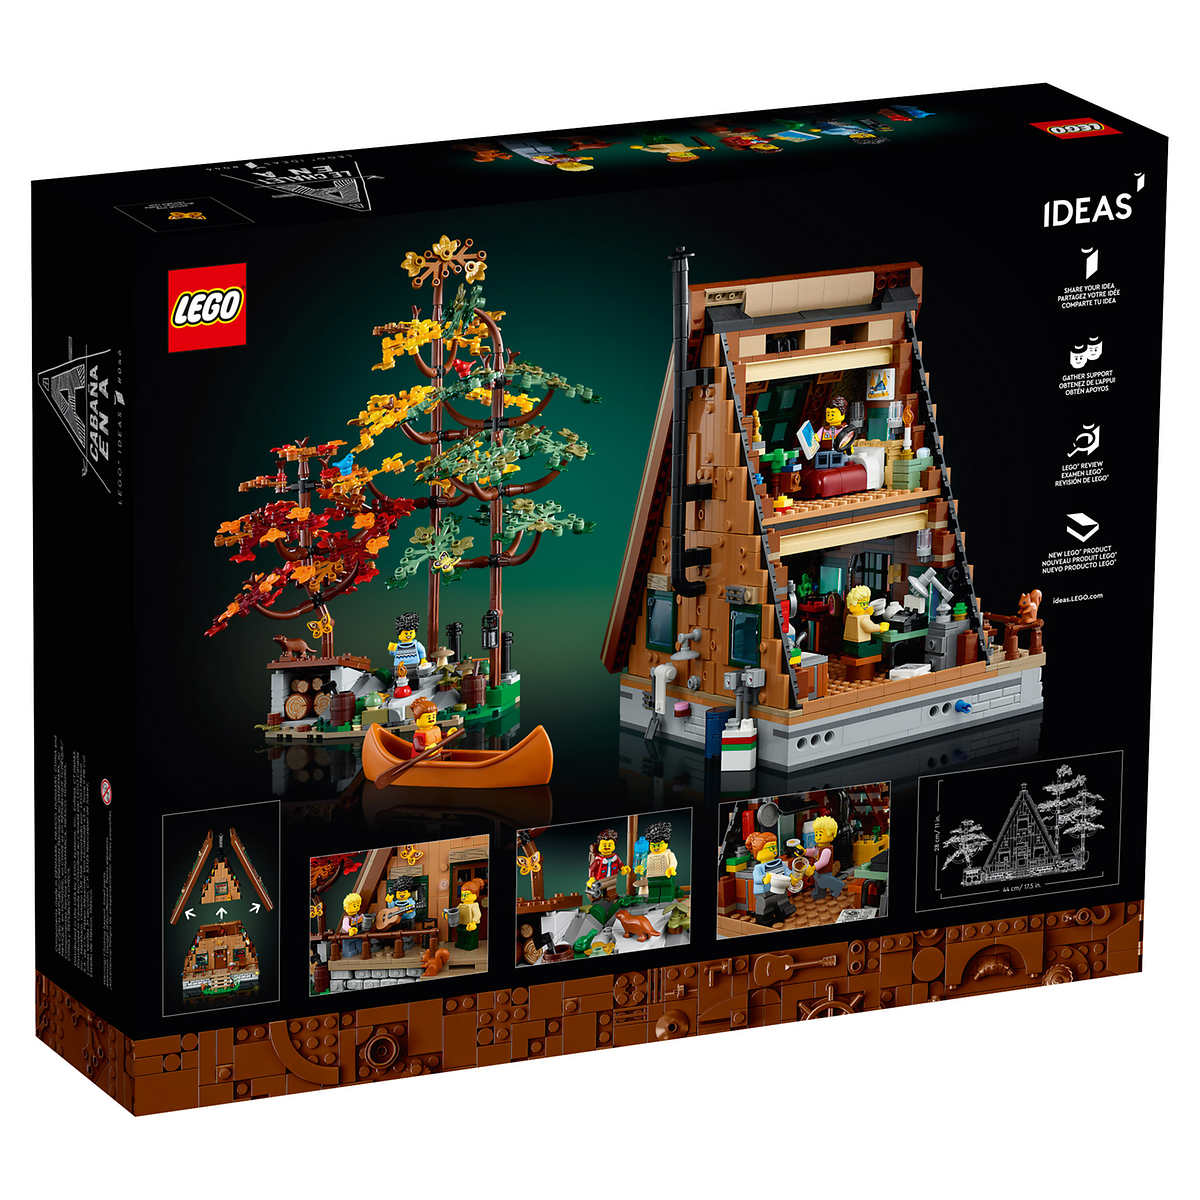 Costco Members: 2082-Piece LEGO Ideas A-Frame Cabin $150 + Free Shipping